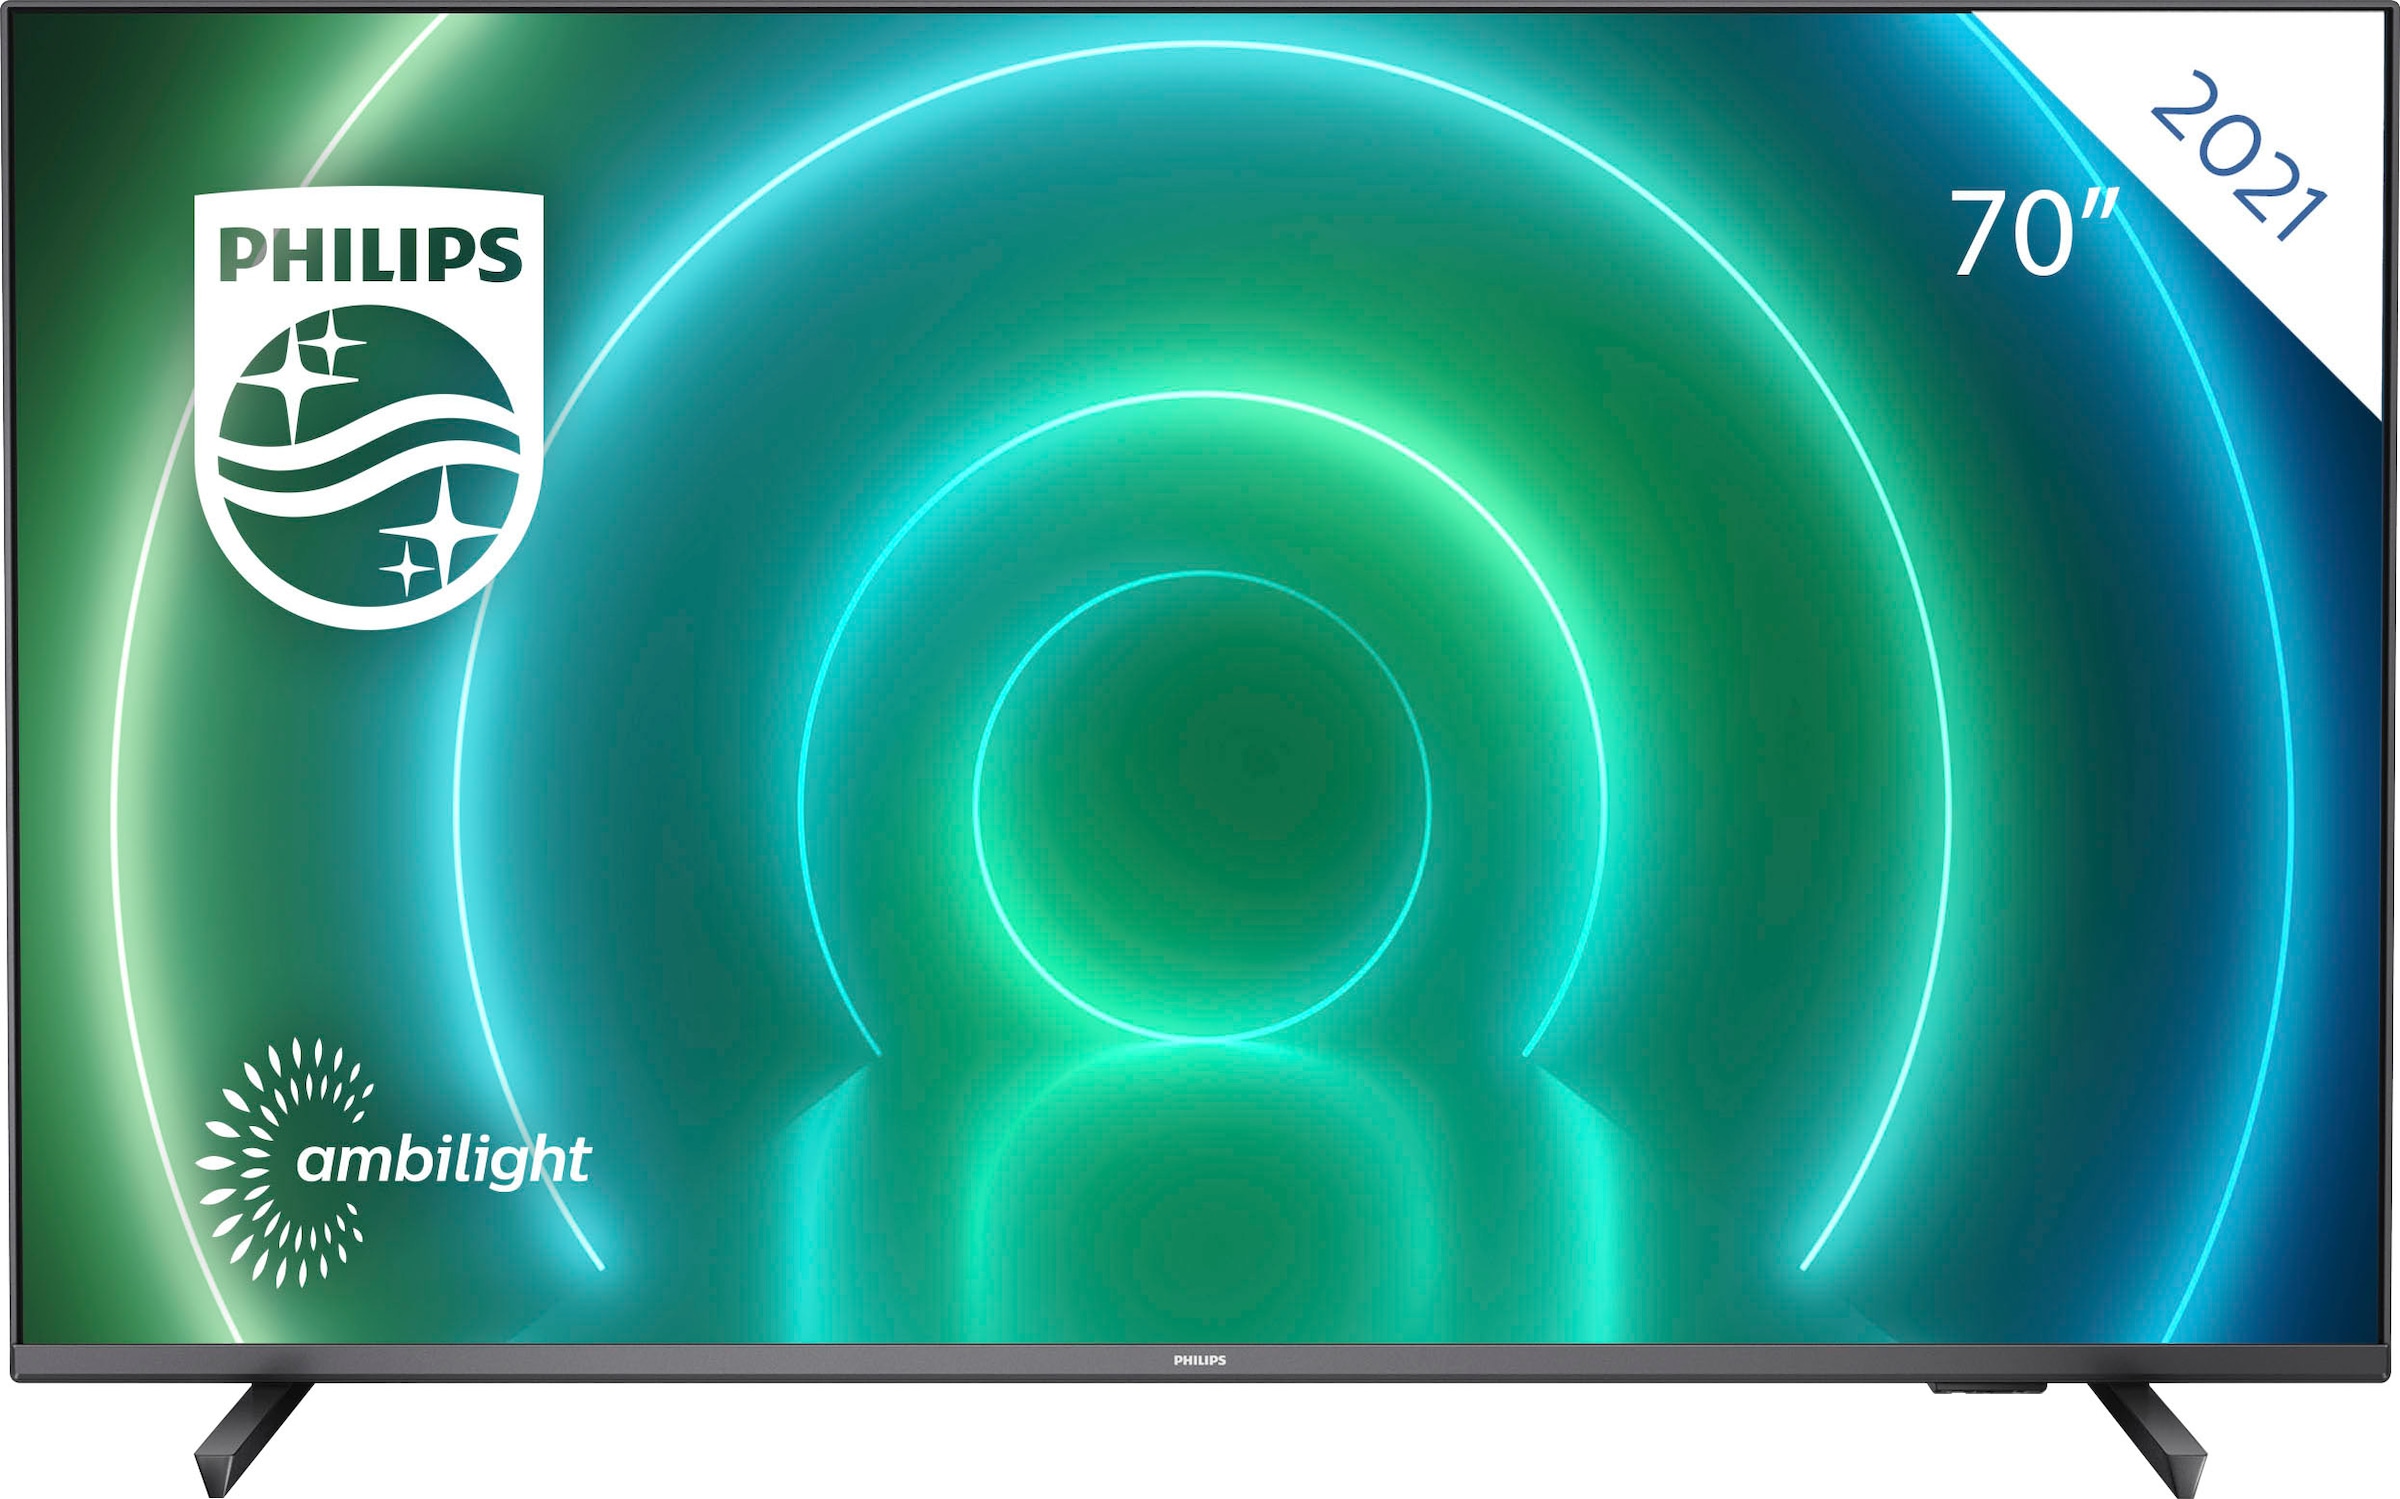 Philips LED-Fernseher »70PUS7906/12«, cm/70 HD, Ambilight 4K 3-seitiges Android TV-Smart-TV, OTTO Zoll, 177 kaufen Ultra bei